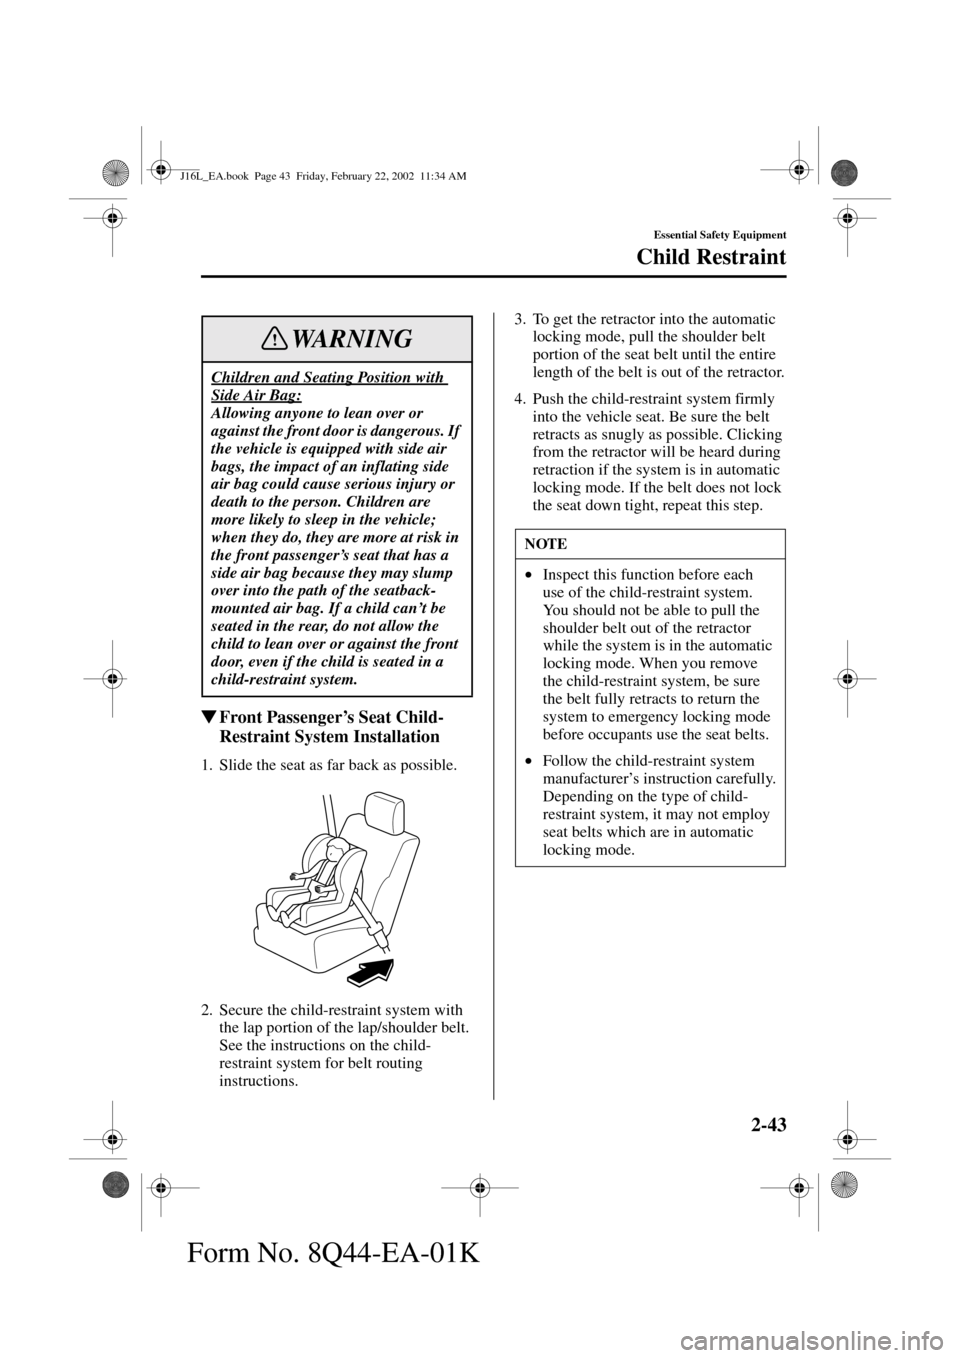 MAZDA MODEL MPV 2002  Owners Manual (in English) 2-43
Essential Safety Equipment
Child Restraint
Form No. 8Q44-EA-01K
Front Passenger’s Seat Child-
Restraint System Installation
1. Slide the seat as far back as possible.
2. Secure the child-restr